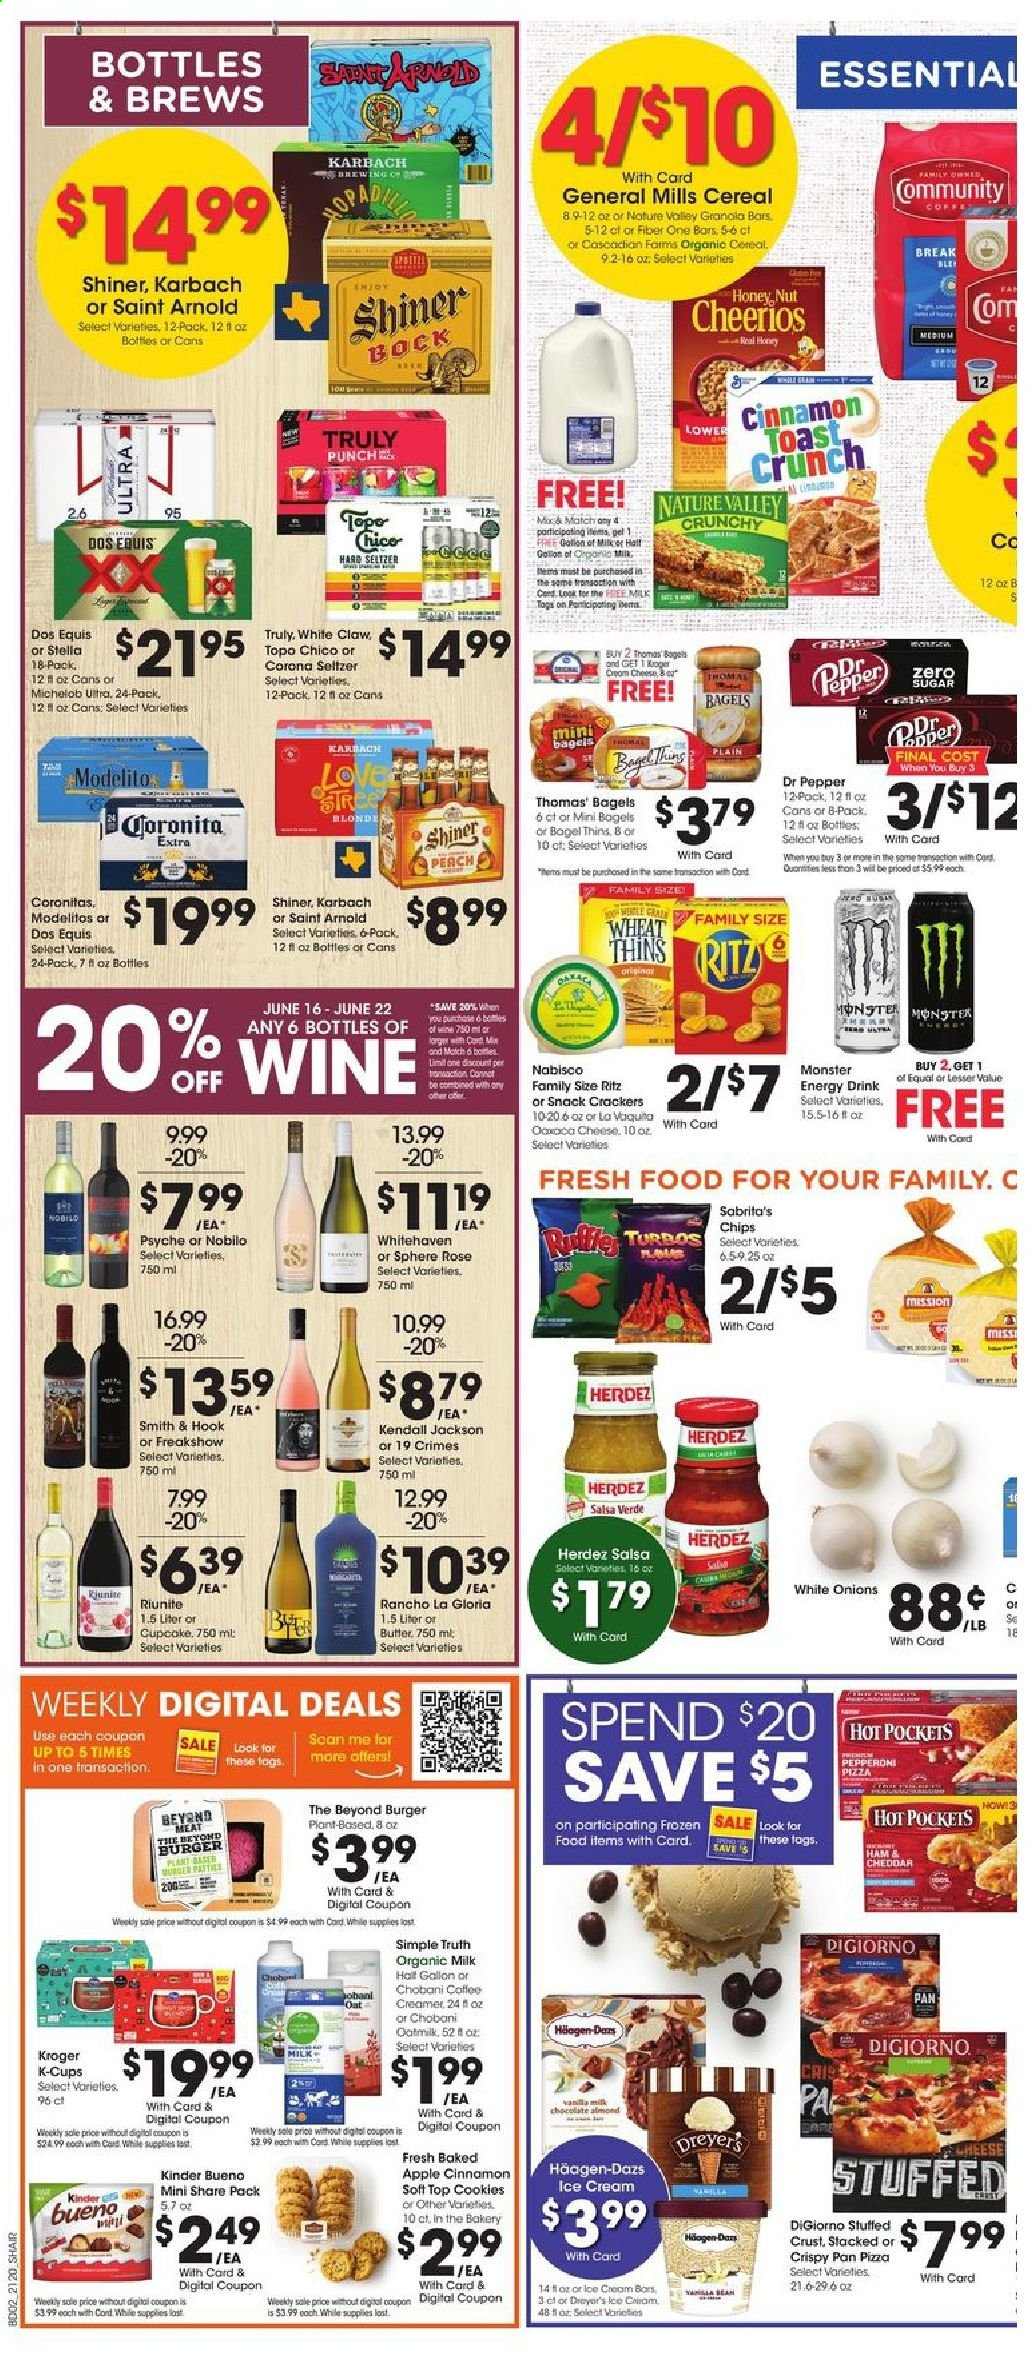 thumbnail - Kroger Flyer - 06/16/2021 - 06/22/2021 - Sales products - bagels, onion, perch, pizza, hamburger, ham, pepperoni, Chobani, organic milk, oat milk, butter, creamer, ice cream, Häagen-Dazs, cookies, crackers, Kinder Bueno, RITZ, Thins, oats, cereals, Cheerios, granola bar, Nature Valley, Fiber One, cinnamon, salsa, energy drink, Monster, Dr. Pepper, coffee capsules, K-Cups, wine, rosé wine, White Claw, Hard Seltzer, TRULY, beer, Dos Equis, Michelob, hook, gallon, pan, rose. Page 4.